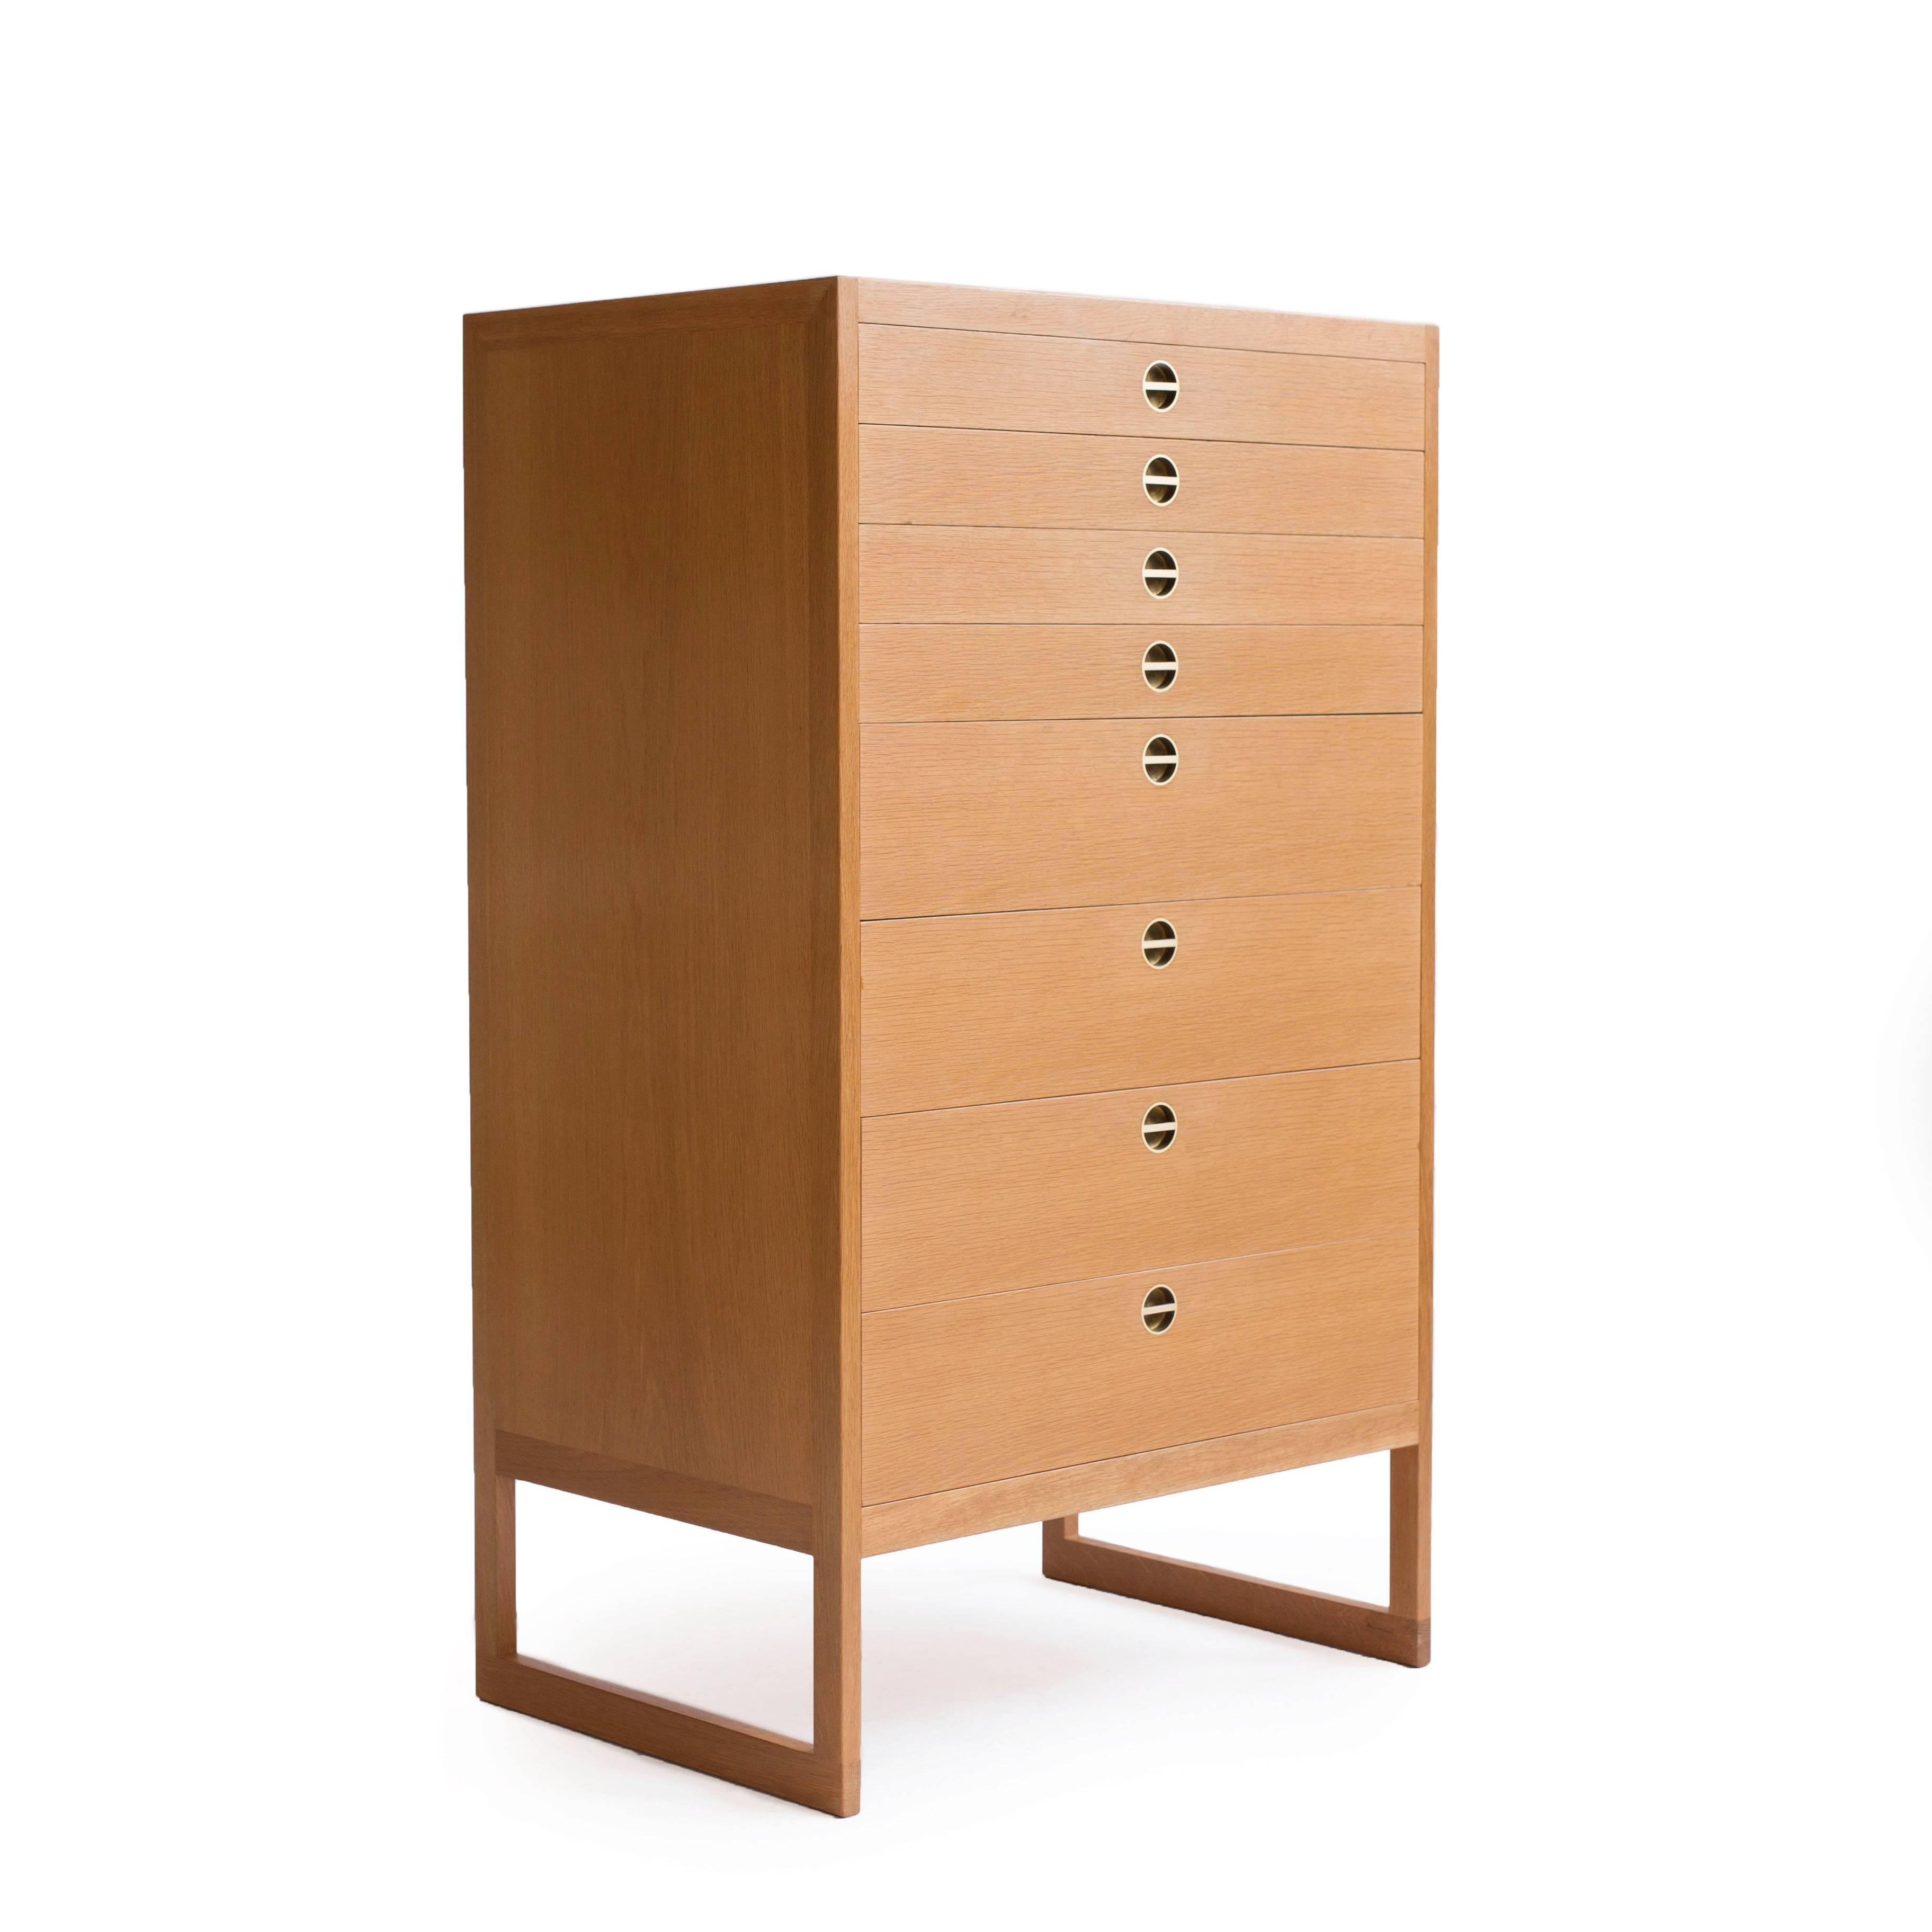 A Børge Mogensen oak chest of drawers. 

Front with four large and four small drawers and handles of brass.

Designed by Børge Mogensen 1957, manufactured by cabinetmaker P. Lauritsen & Son, Denmark model BM64.